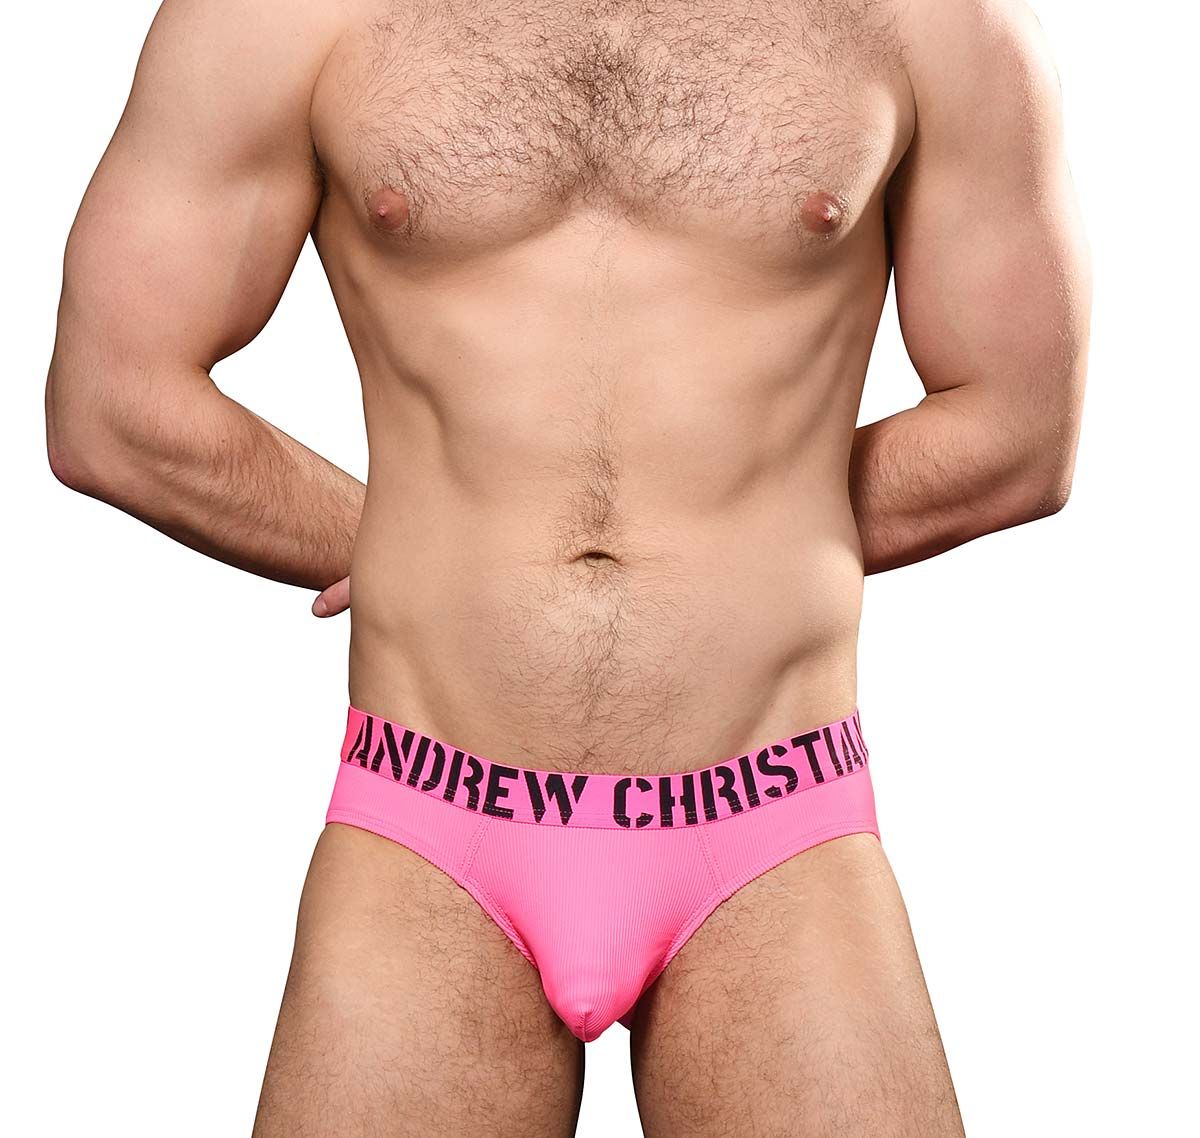 Andrew Christian Slip HOTNESS RIB BRIEF w/ ALMOST NAKED 92879, roze